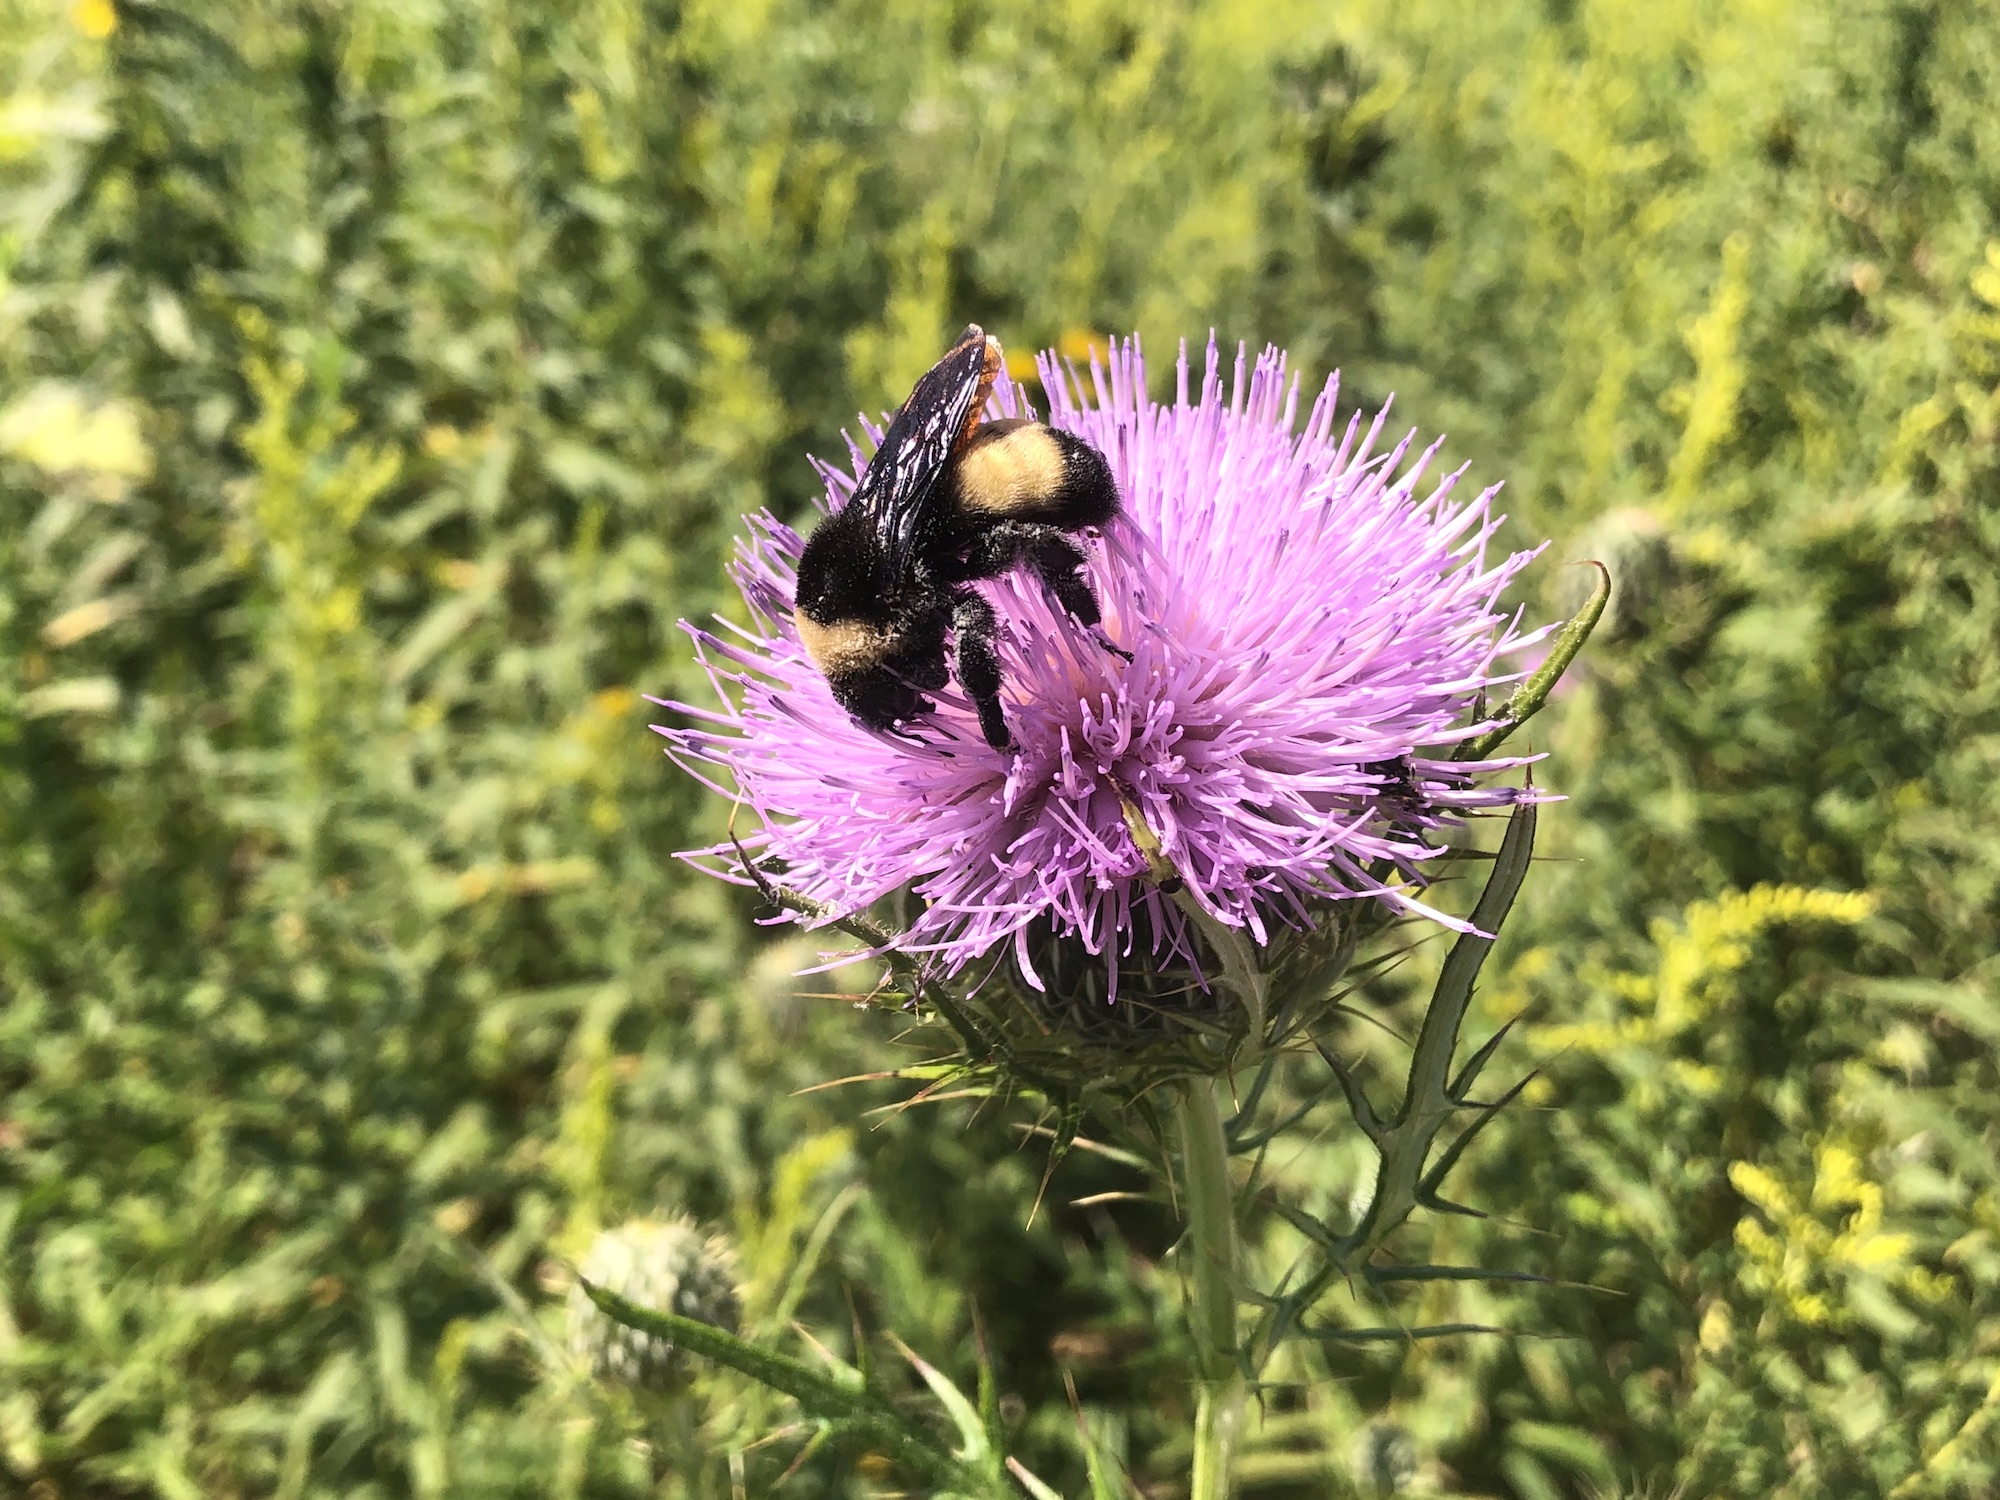 Bumblebee on Thistle on August 20, 2020.